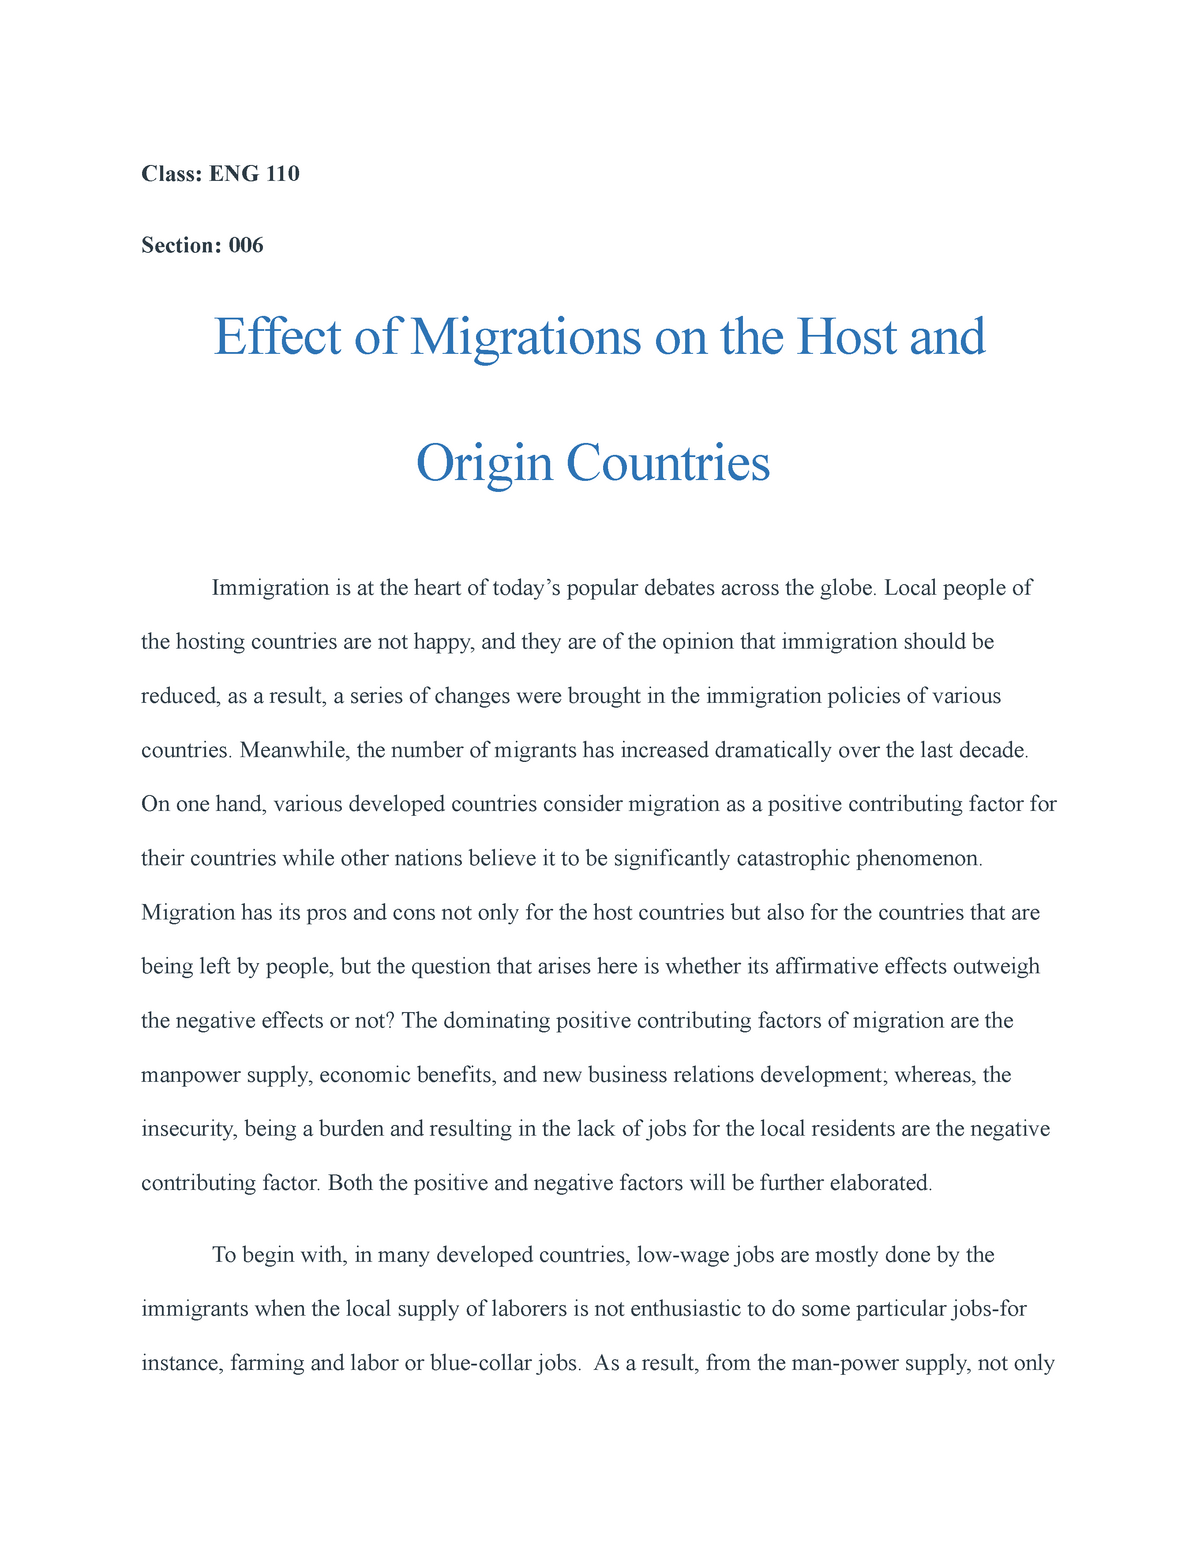 causes of migration essay